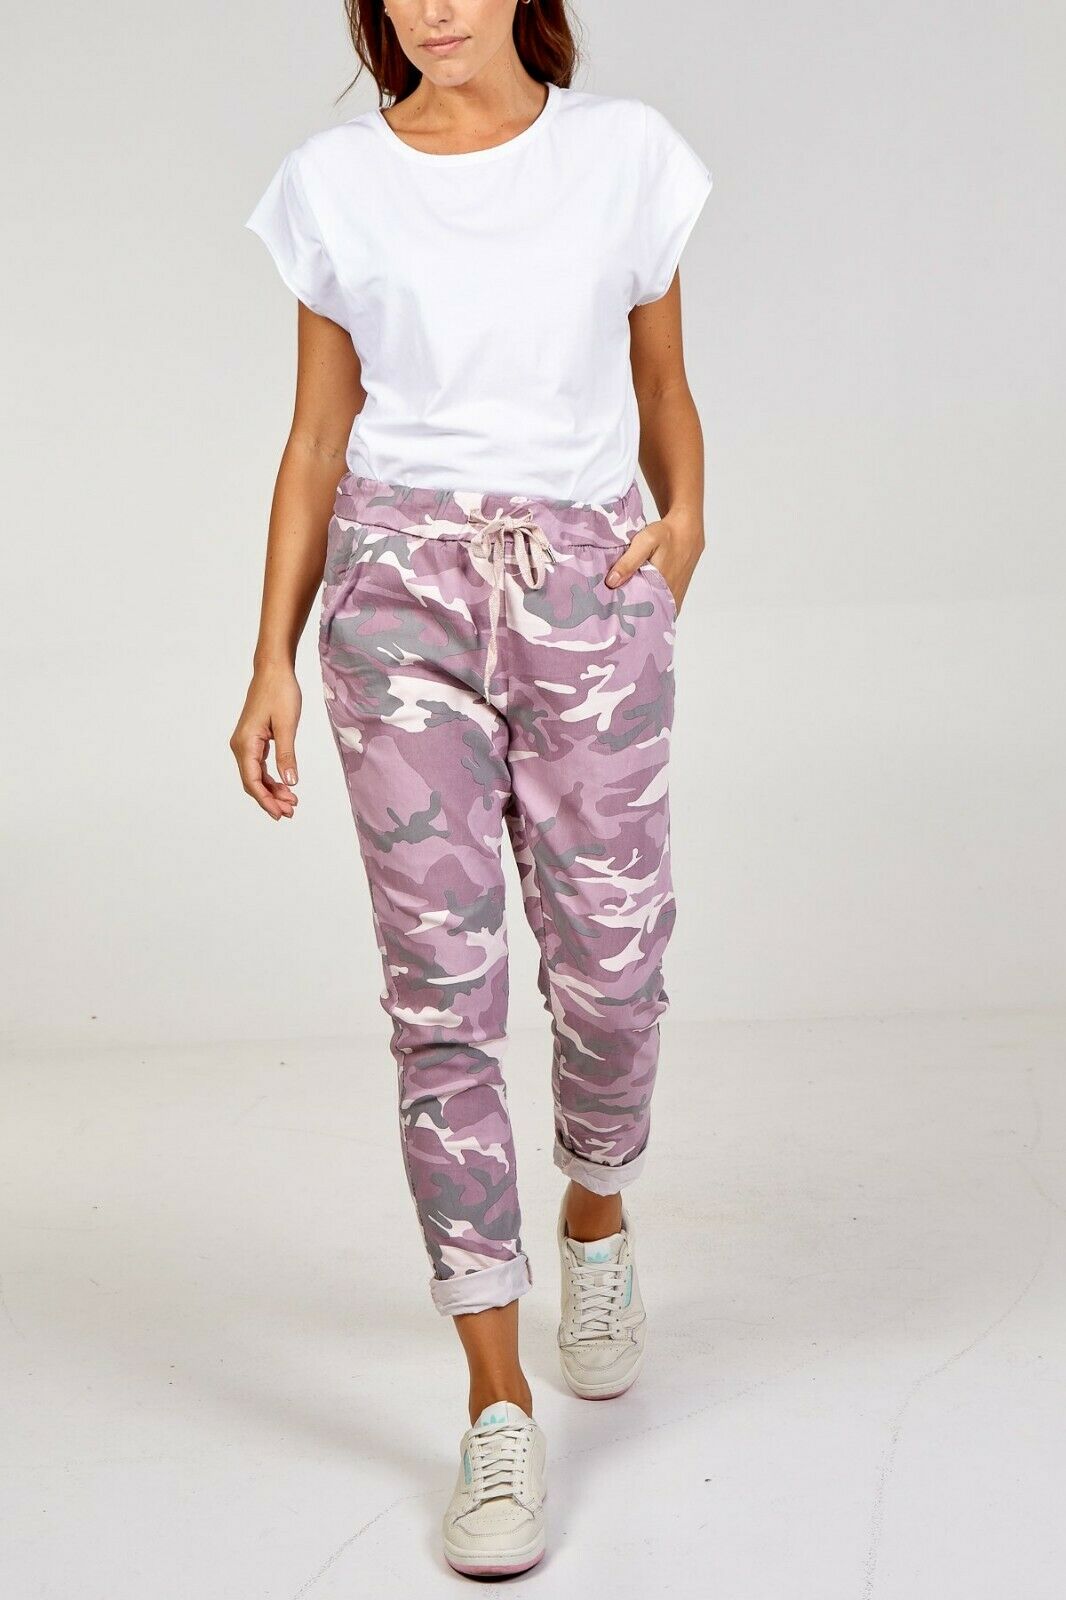 Ladies "Magic" Light Pink Camouflage Trousers.